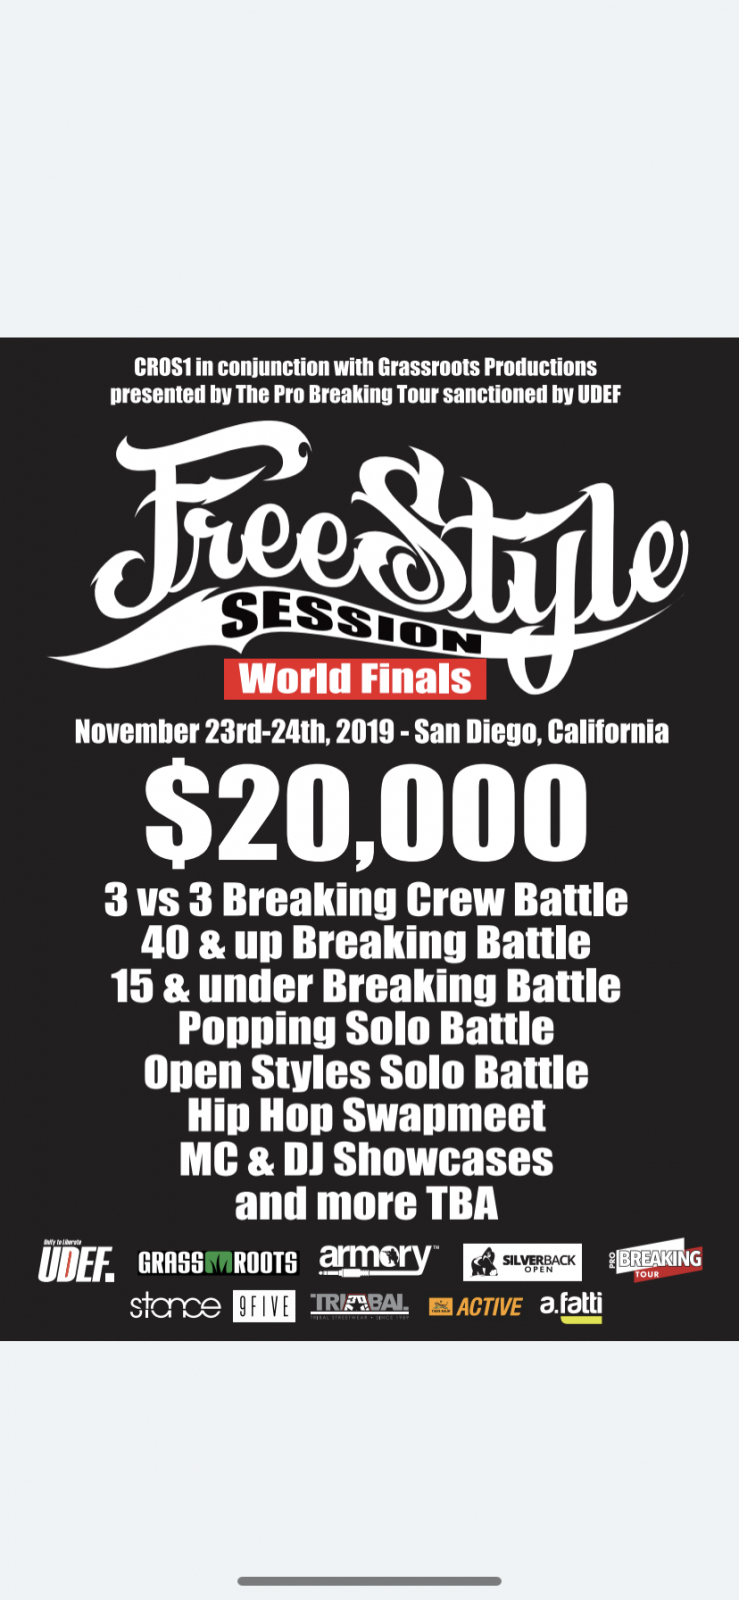 Freestyle Session World Finals 2019 poster